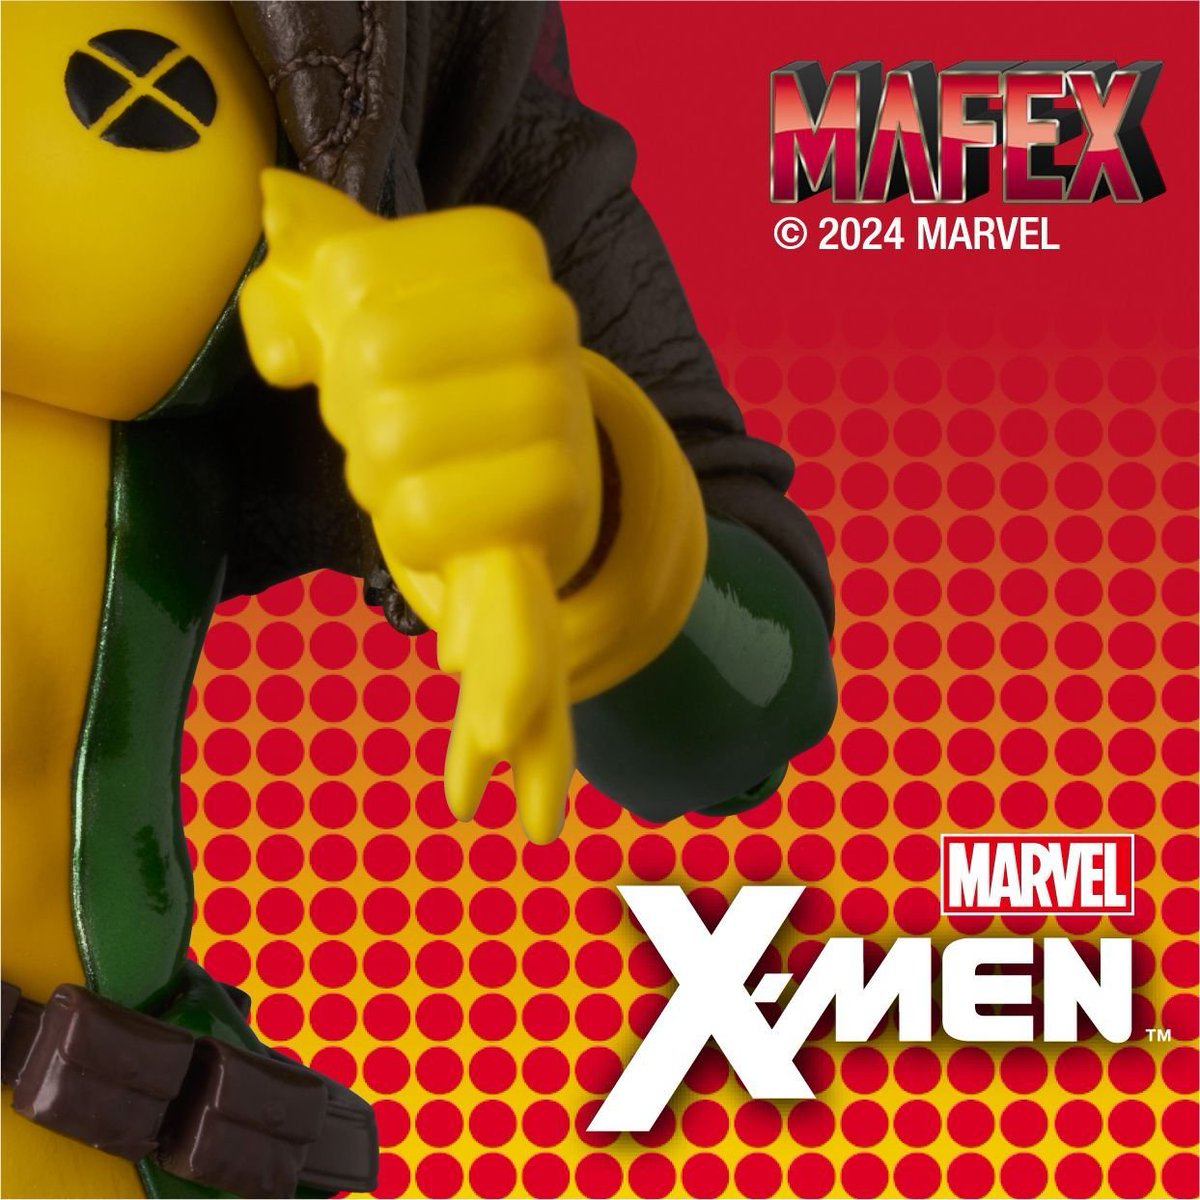 Medicom MAFEX X-Men's Rogue is going up for preorder this month.